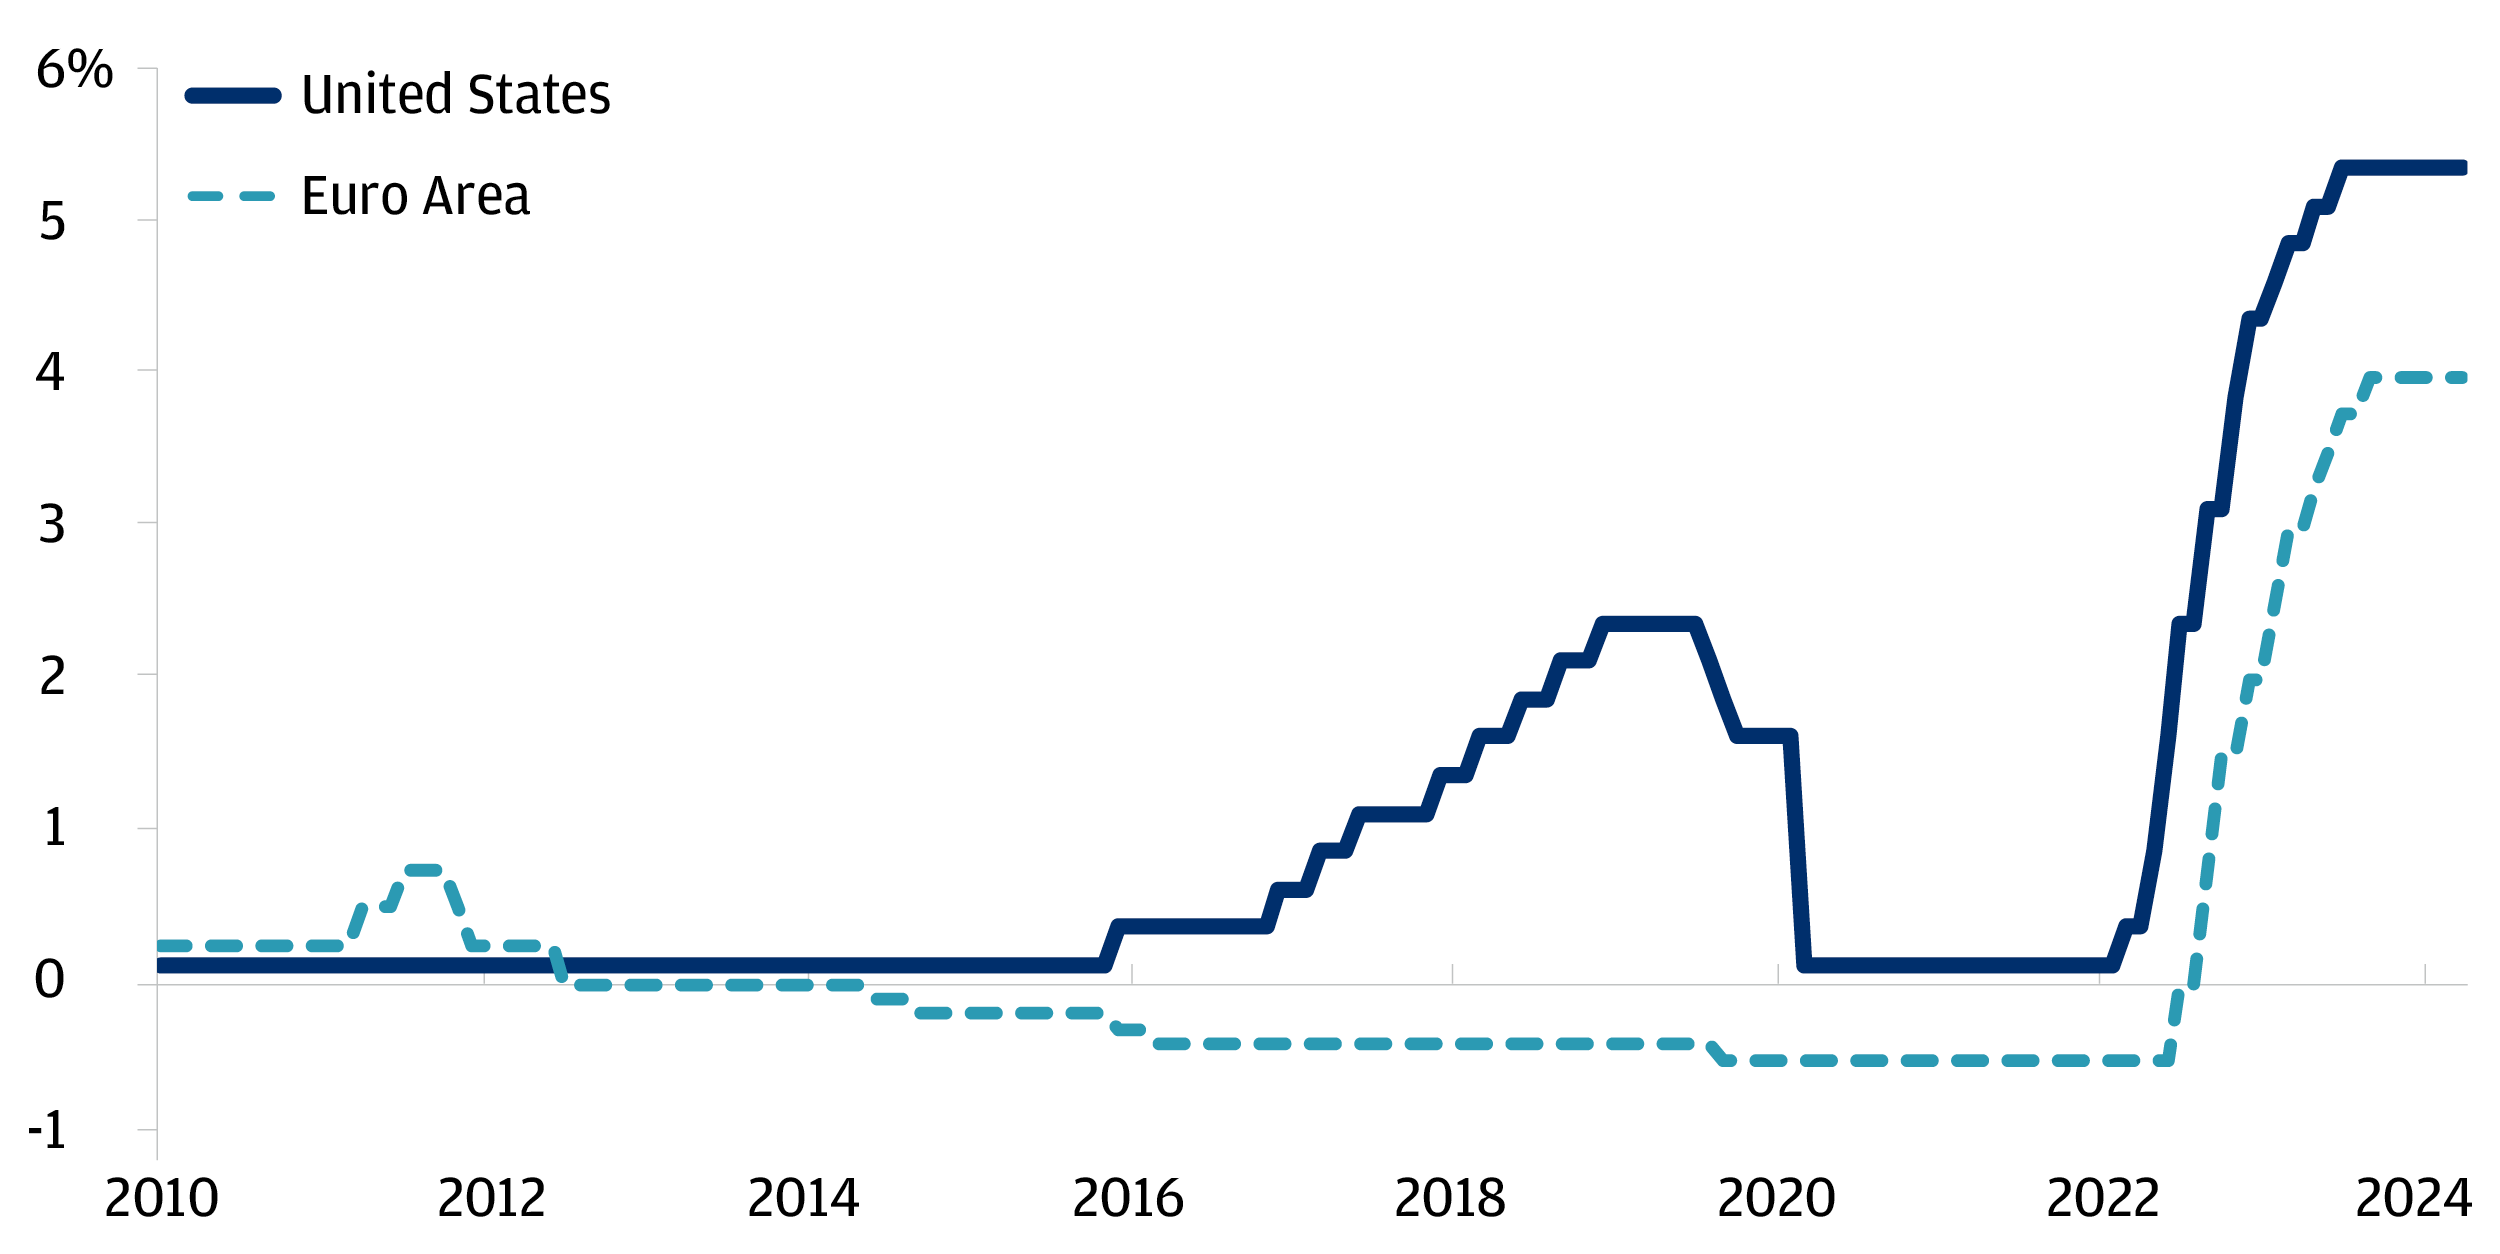 Line chart as of May 1st, 2024 showing U.S. and Euro Area central bank policy rates since 2010 in percentage terms; based on monthly data. The deposit facility rate is shown for the Euro Area. Beginning in 2020, policy rates for both regions remained around or below zero through early 2022. However, over the past two years there has been a substantial increase for both policy rates as their respective central banks implemented an aggressive hiking cycle. Since last October, however, both policy rates remained steady at 5.4% for the U.S. and 4.0% for the Euro Area.